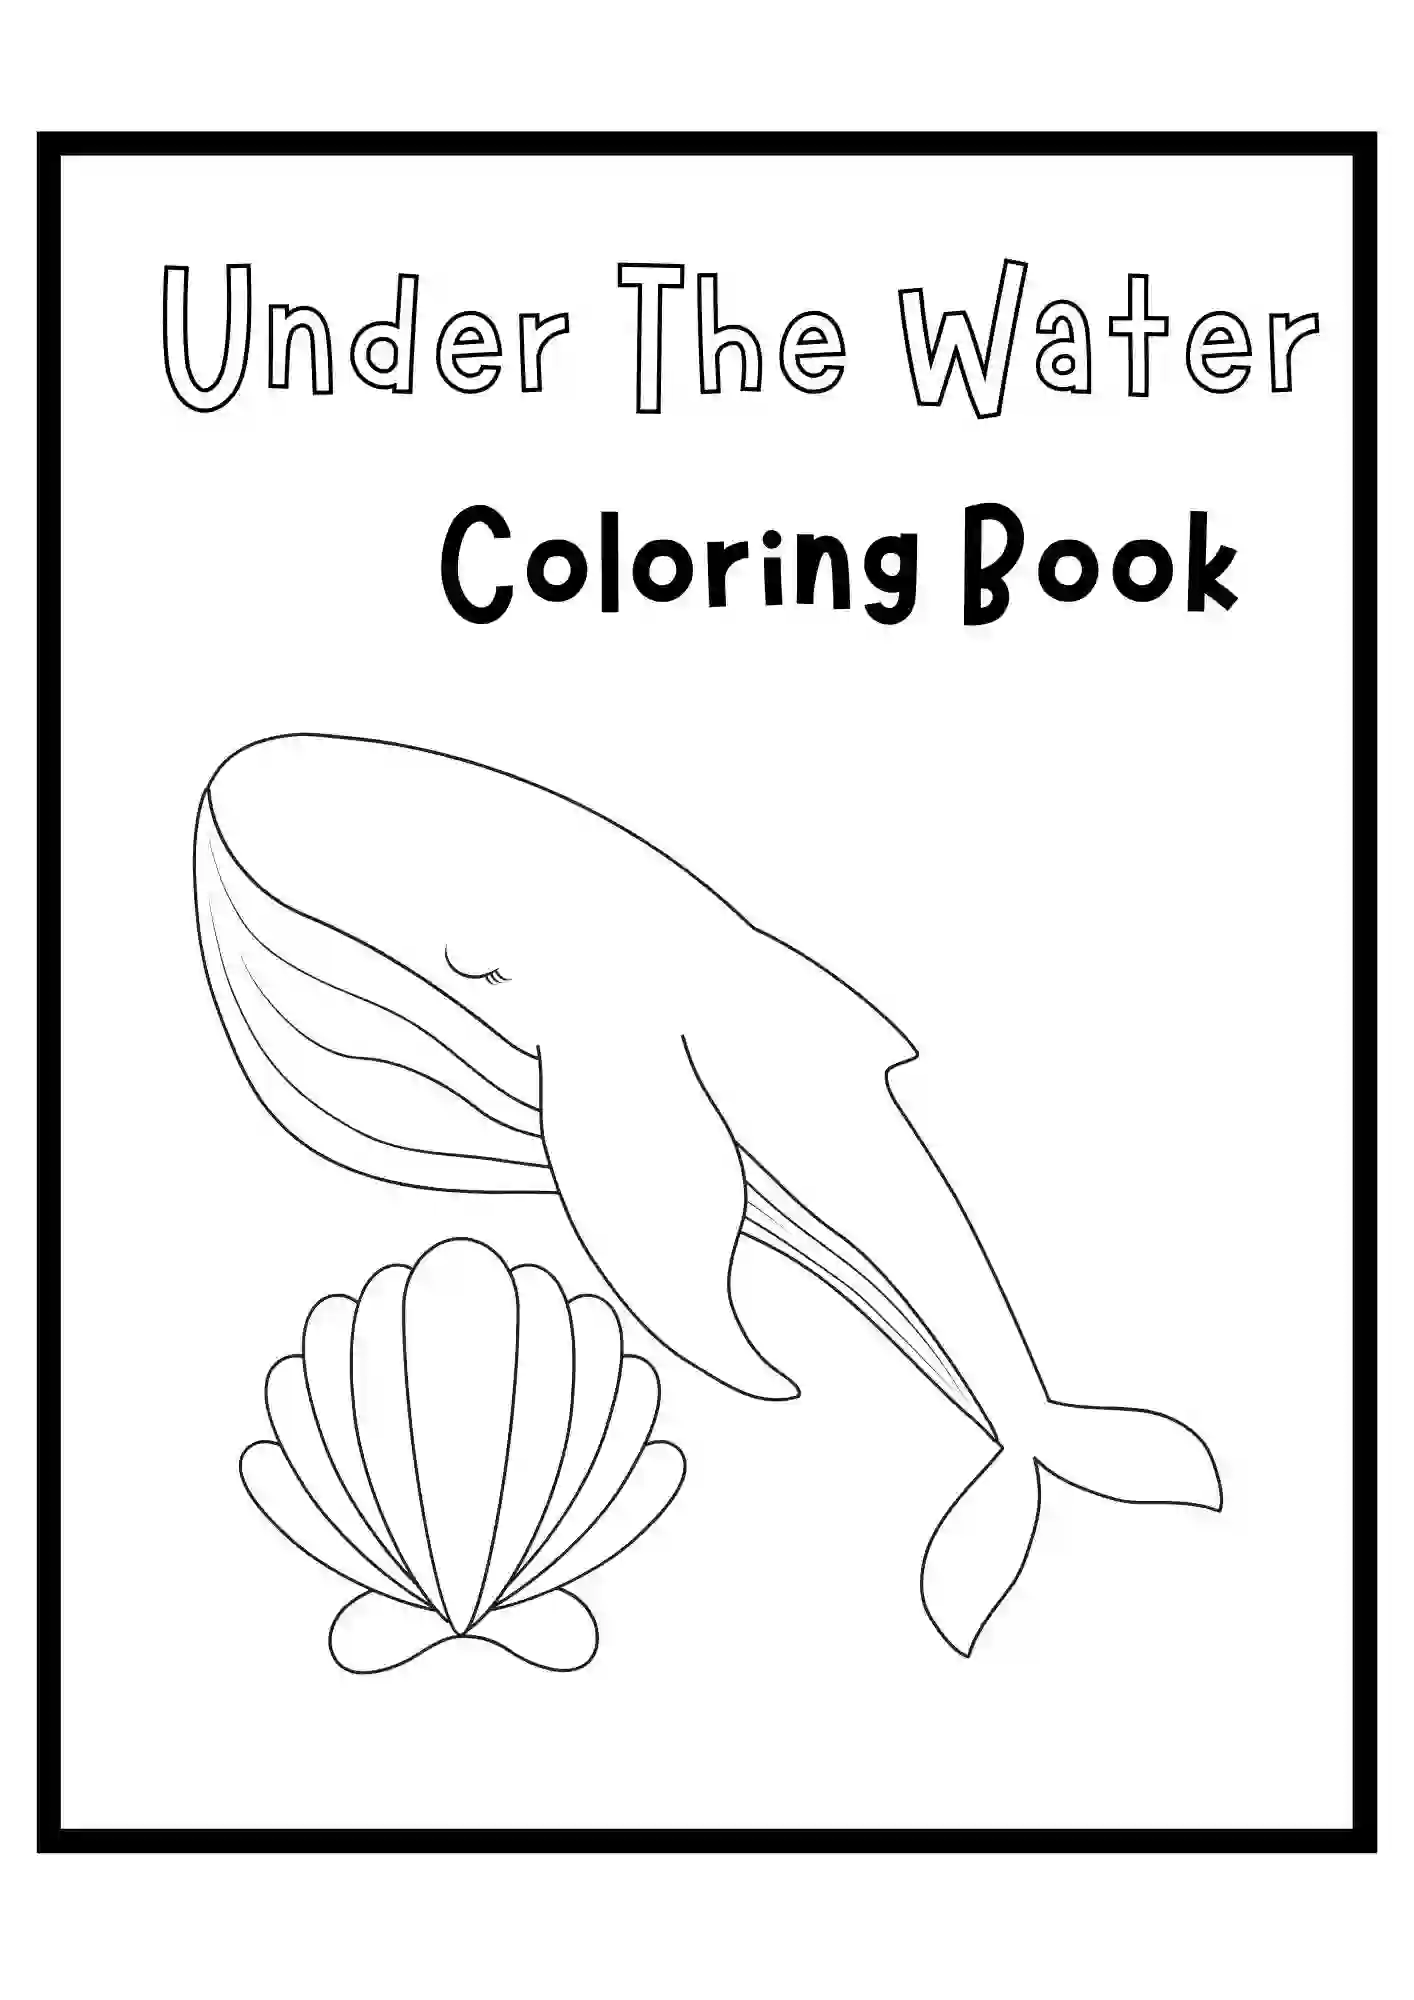 Under the Water Colouring Worksheets